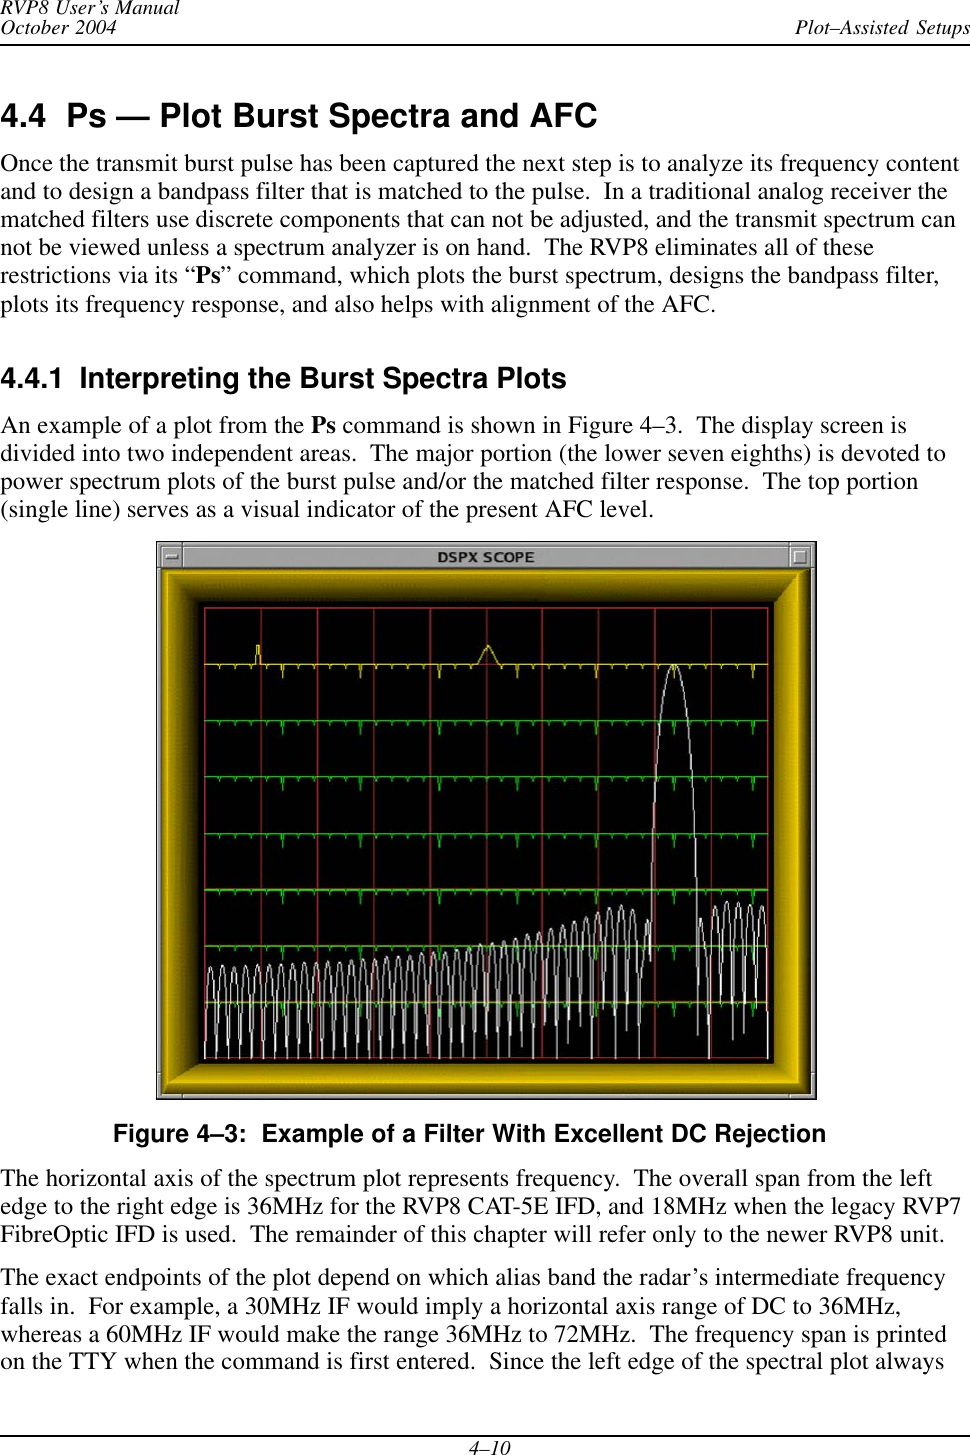 Plot–Assisted SetupsRVP8 User’s ManualOctober 20044–104.4  Ps — Plot Burst Spectra and AFCOnce the transmit burst pulse has been captured the next step is to analyze its frequency contentand to design a bandpass filter that is matched to the pulse.  In a traditional analog receiver thematched filters use discrete components that can not be adjusted, and the transmit spectrum cannot be viewed unless a spectrum analyzer is on hand.  The RVP8 eliminates all of theserestrictions via its “Ps” command, which plots the burst spectrum, designs the bandpass filter,plots its frequency response, and also helps with alignment of the AFC.4.4.1  Interpreting the Burst Spectra PlotsAn example of a plot from the Ps command is shown in Figure 4–3.  The display screen isdivided into two independent areas.  The major portion (the lower seven eighths) is devoted topower spectrum plots of the burst pulse and/or the matched filter response.  The top portion(single line) serves as a visual indicator of the present AFC level.Figure 4–3:  Example of a Filter With Excellent DC RejectionThe horizontal axis of the spectrum plot represents frequency.  The overall span from the leftedge to the right edge is 36MHz for the RVP8 CAT-5E IFD, and 18MHz when the legacy RVP7FibreOptic IFD is used.  The remainder of this chapter will refer only to the newer RVP8 unit.The exact endpoints of the plot depend on which alias band the radar’s intermediate frequencyfalls in.  For example, a 30MHz IF would imply a horizontal axis range of DC to 36MHz,whereas a 60MHz IF would make the range 36MHz to 72MHz.  The frequency span is printedon the TTY when the command is first entered.  Since the left edge of the spectral plot always